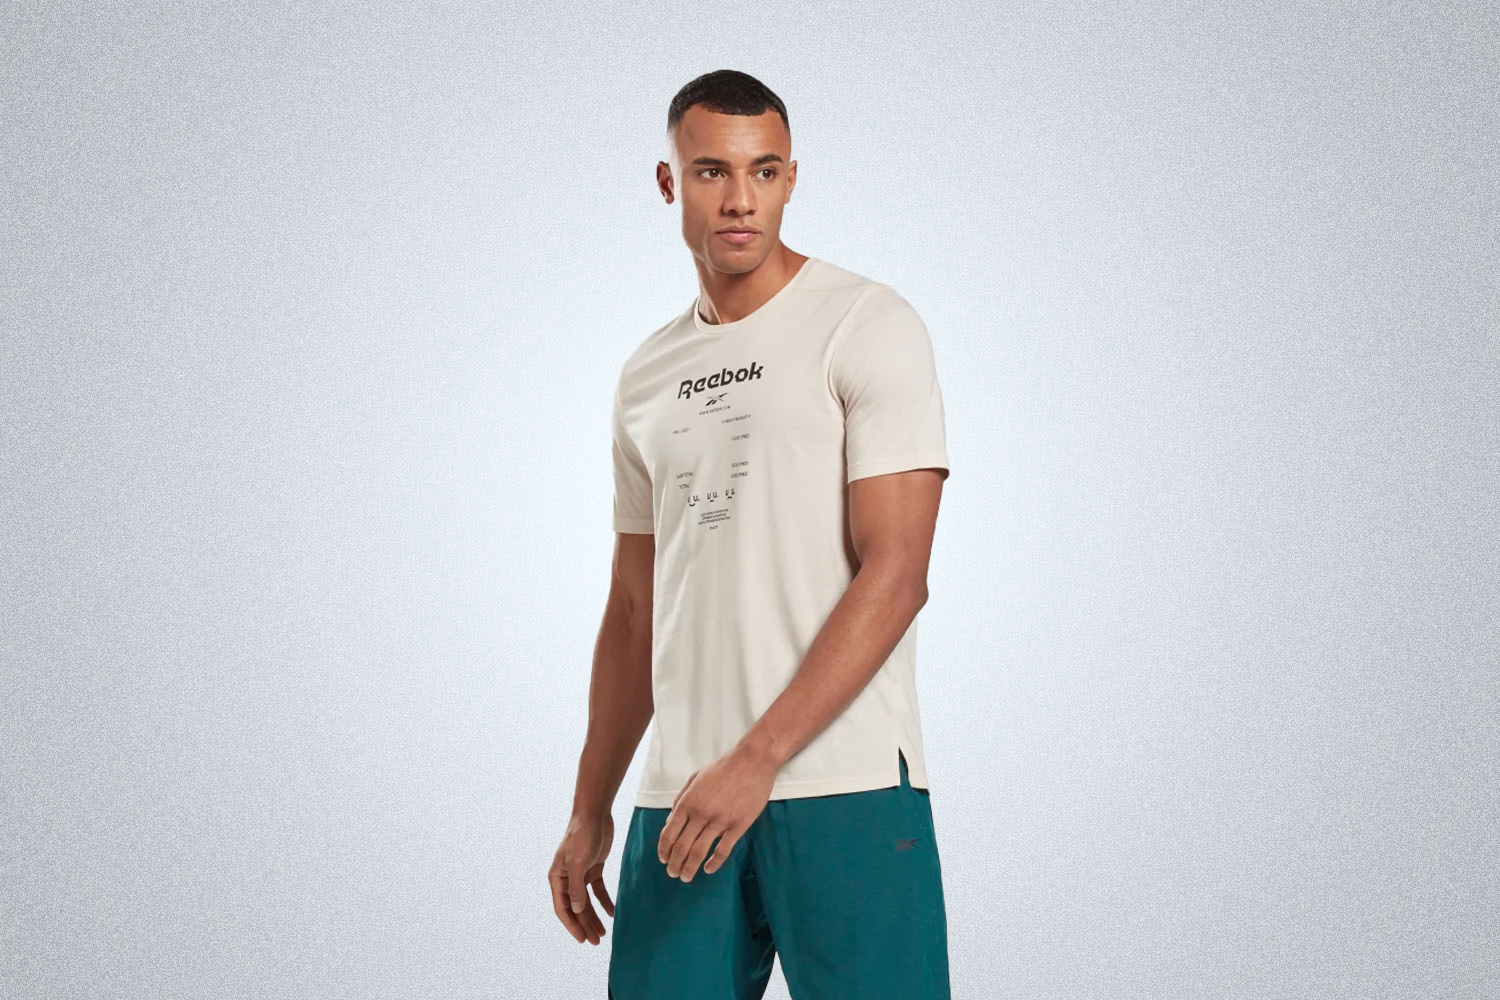 The Reebok Speedwick Graphic Move Tee is a great performance tee for workouts and exercise